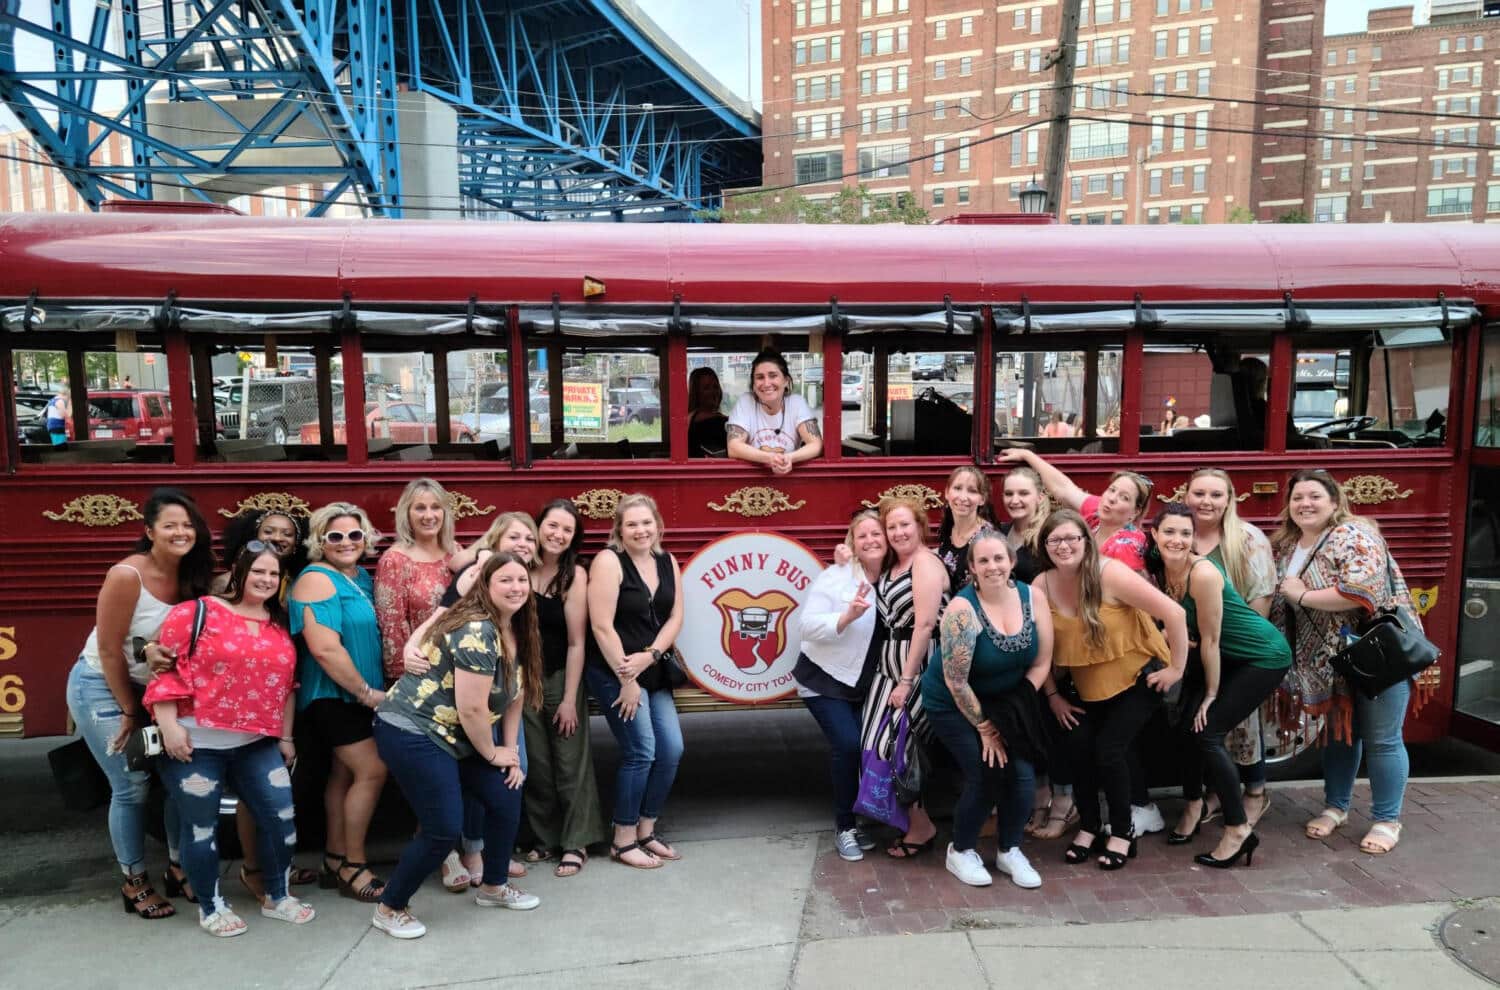 Cleveland Funny Bus is a top 10 thing to do in Cleveland